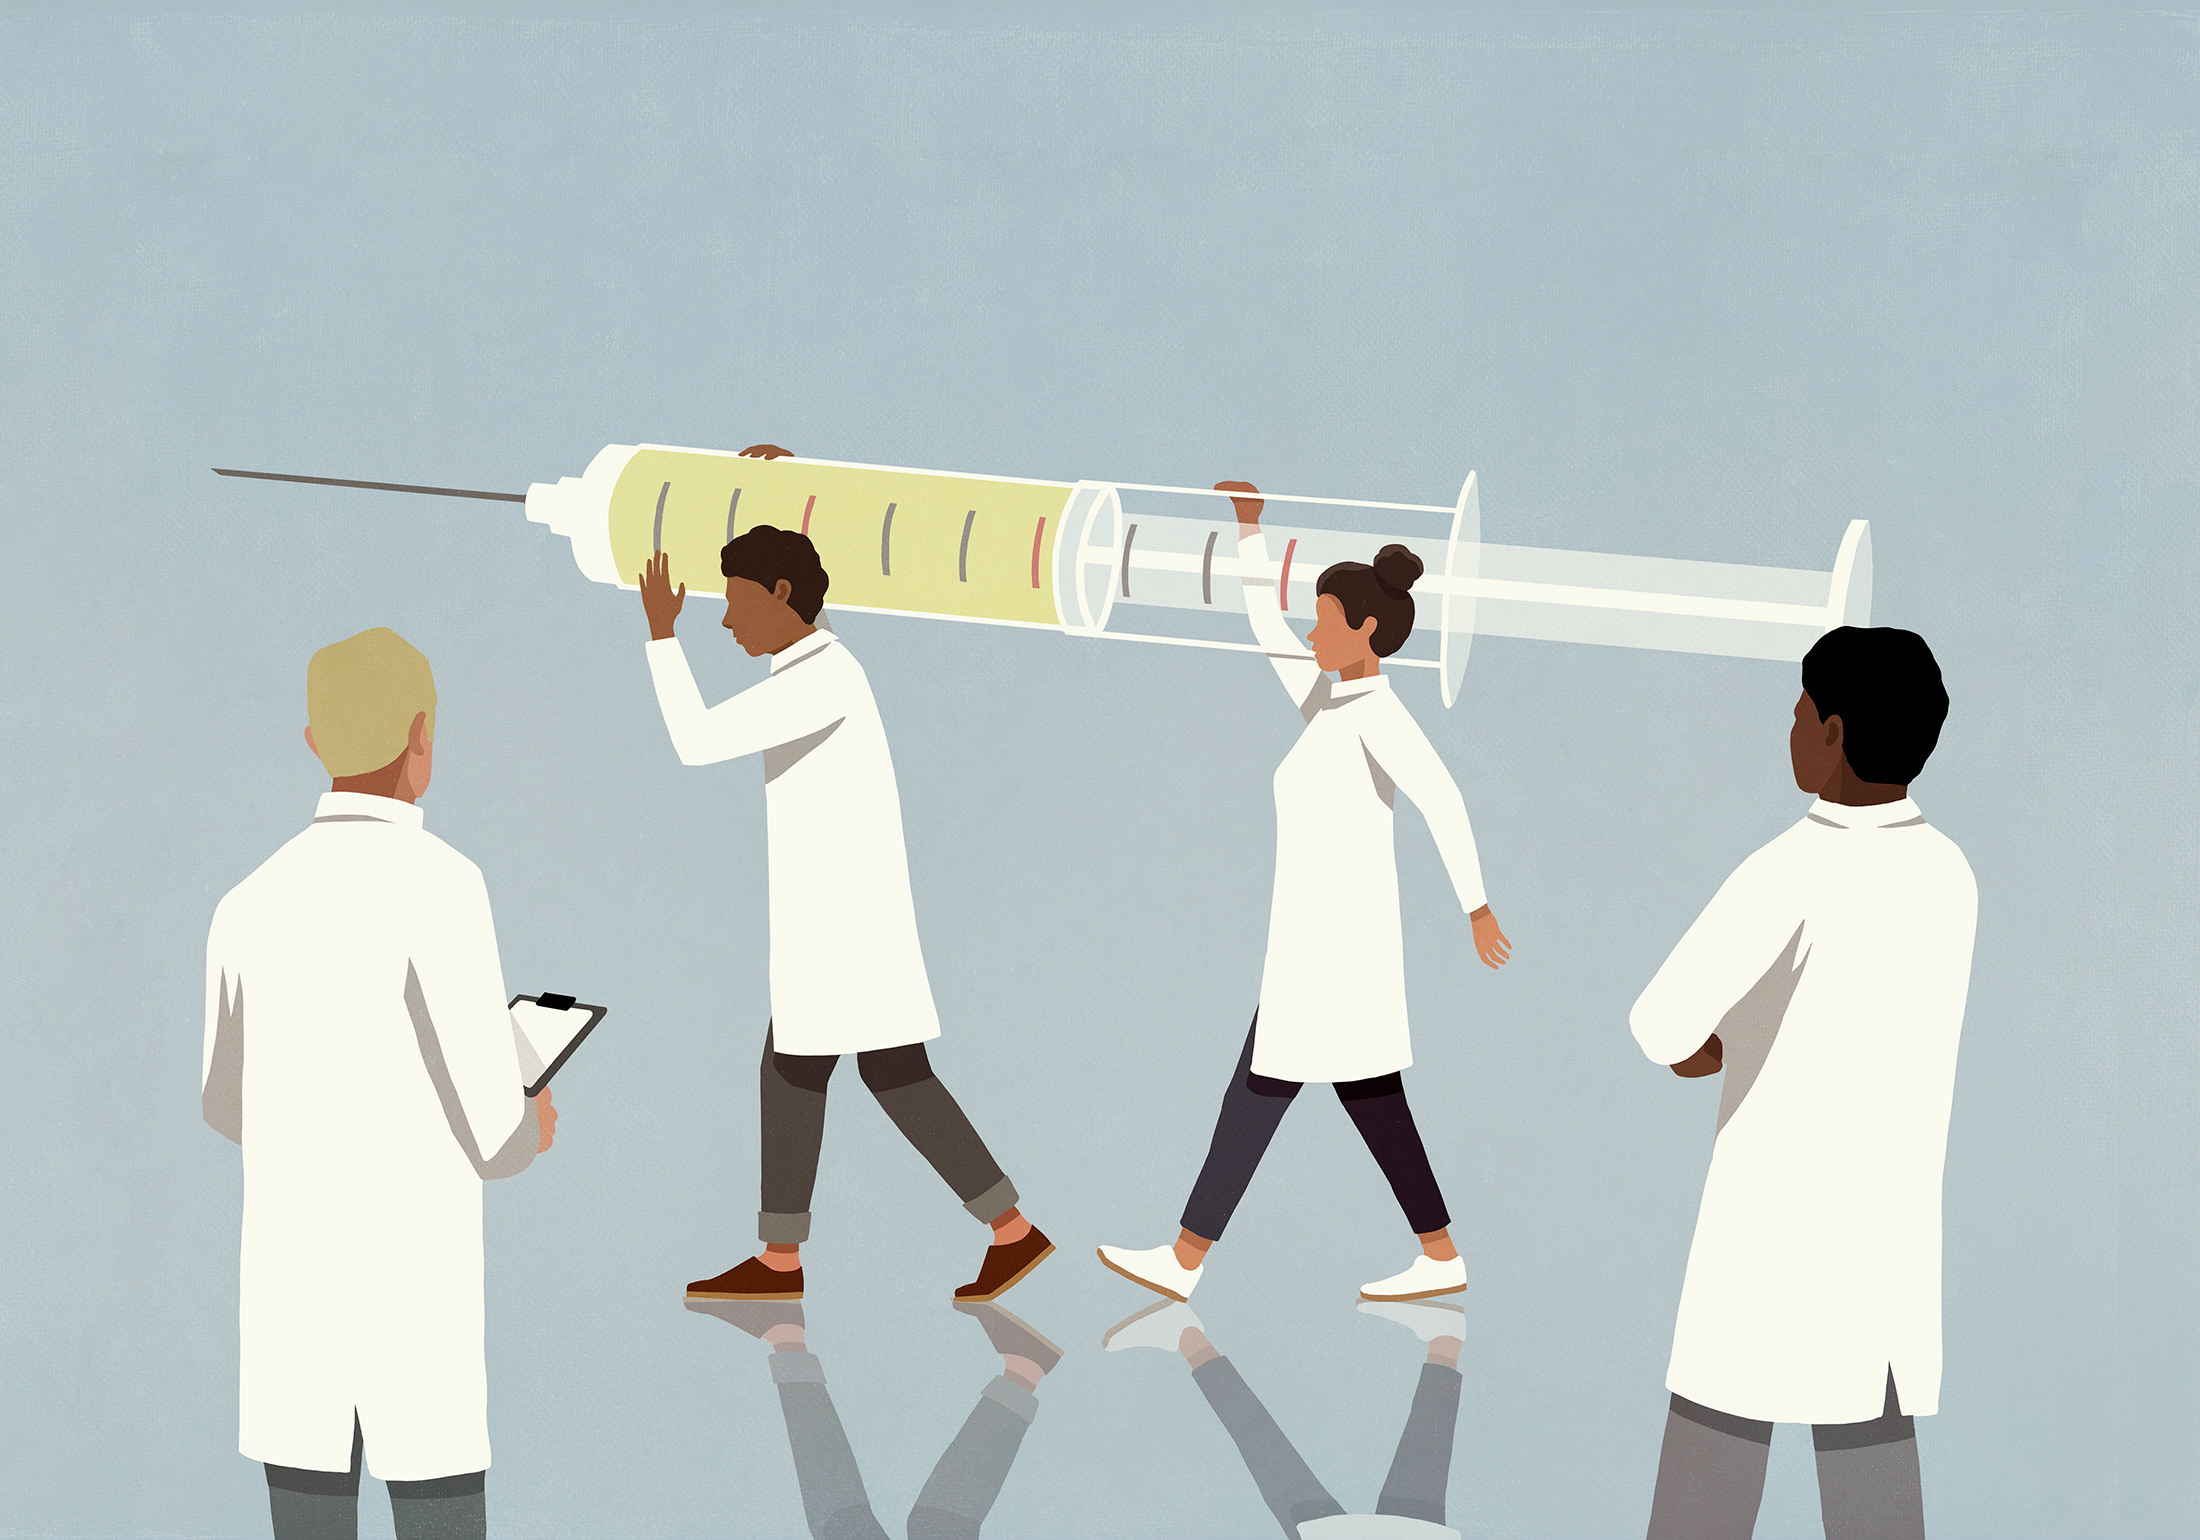 Doctors carrying large Covid vaccine syringe - illustrated